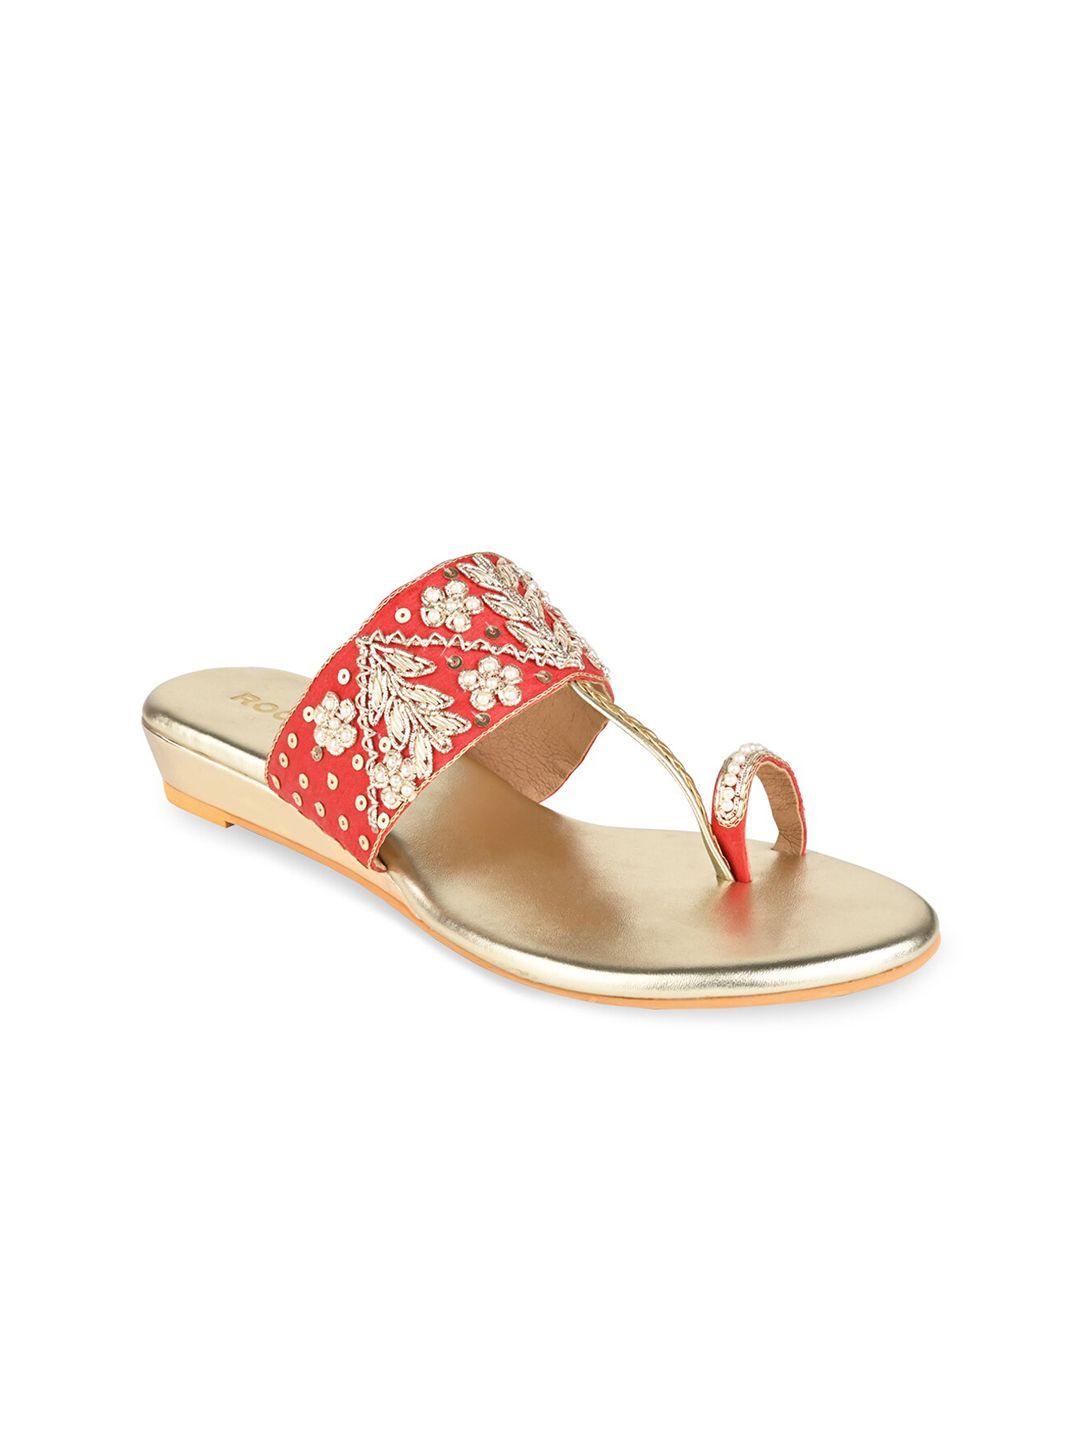 Rocia Women Red Embellished Ethnic T-Strap Flats